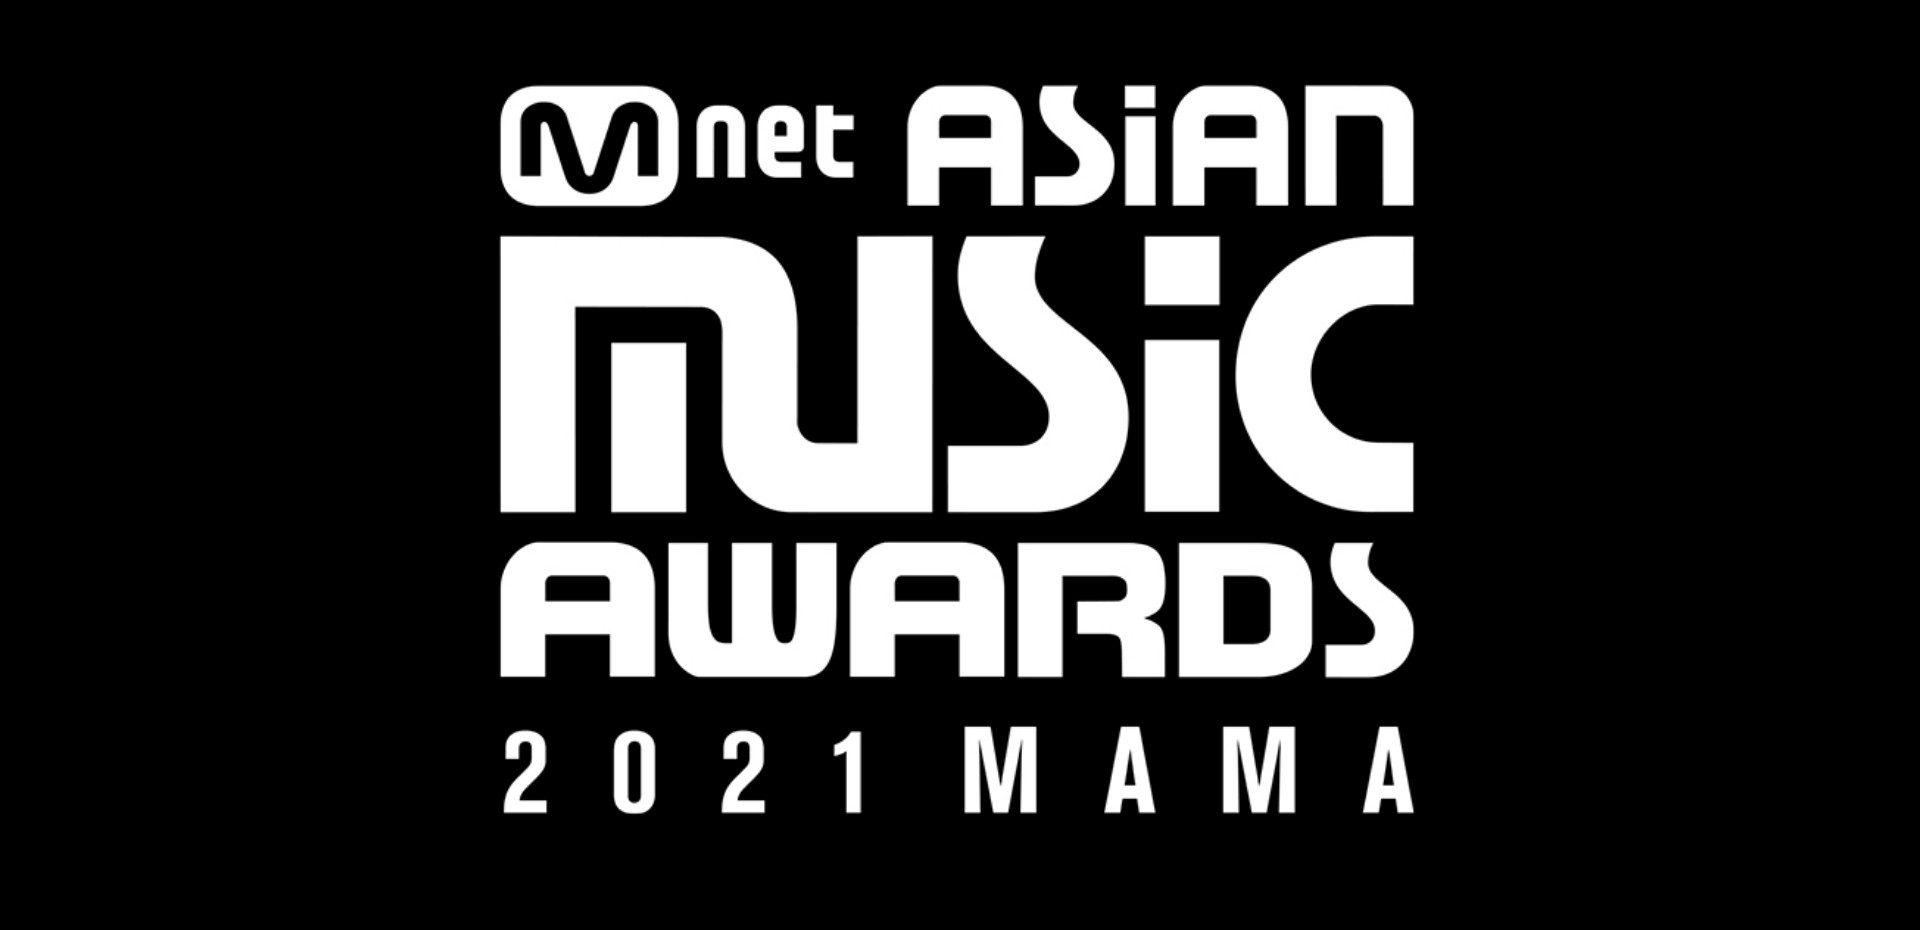 Asian Music Awards announces return, to launch special video to